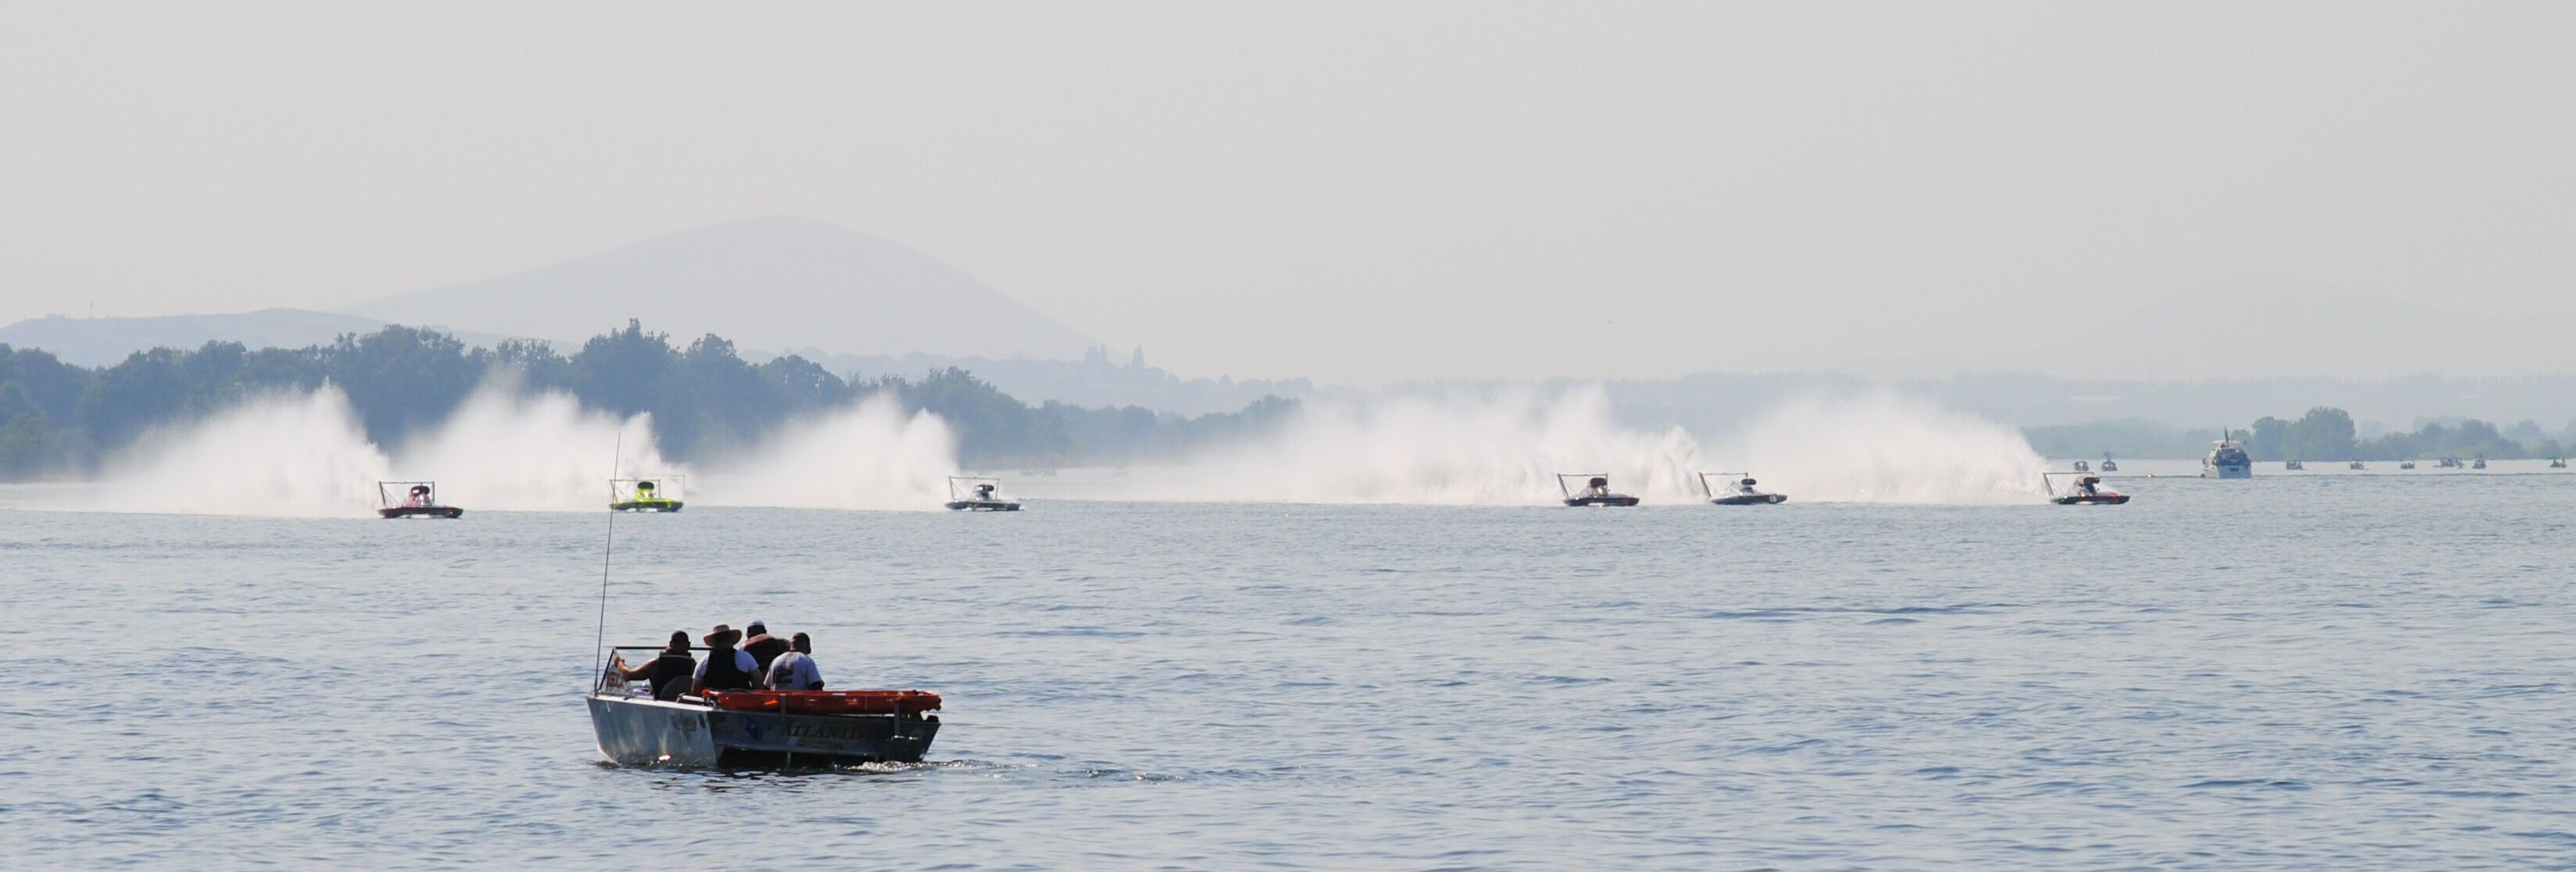 Steve David (far right) hits the line in lane 1 in the 1 Oh Boy! Oberto. Photo by Craig Barney